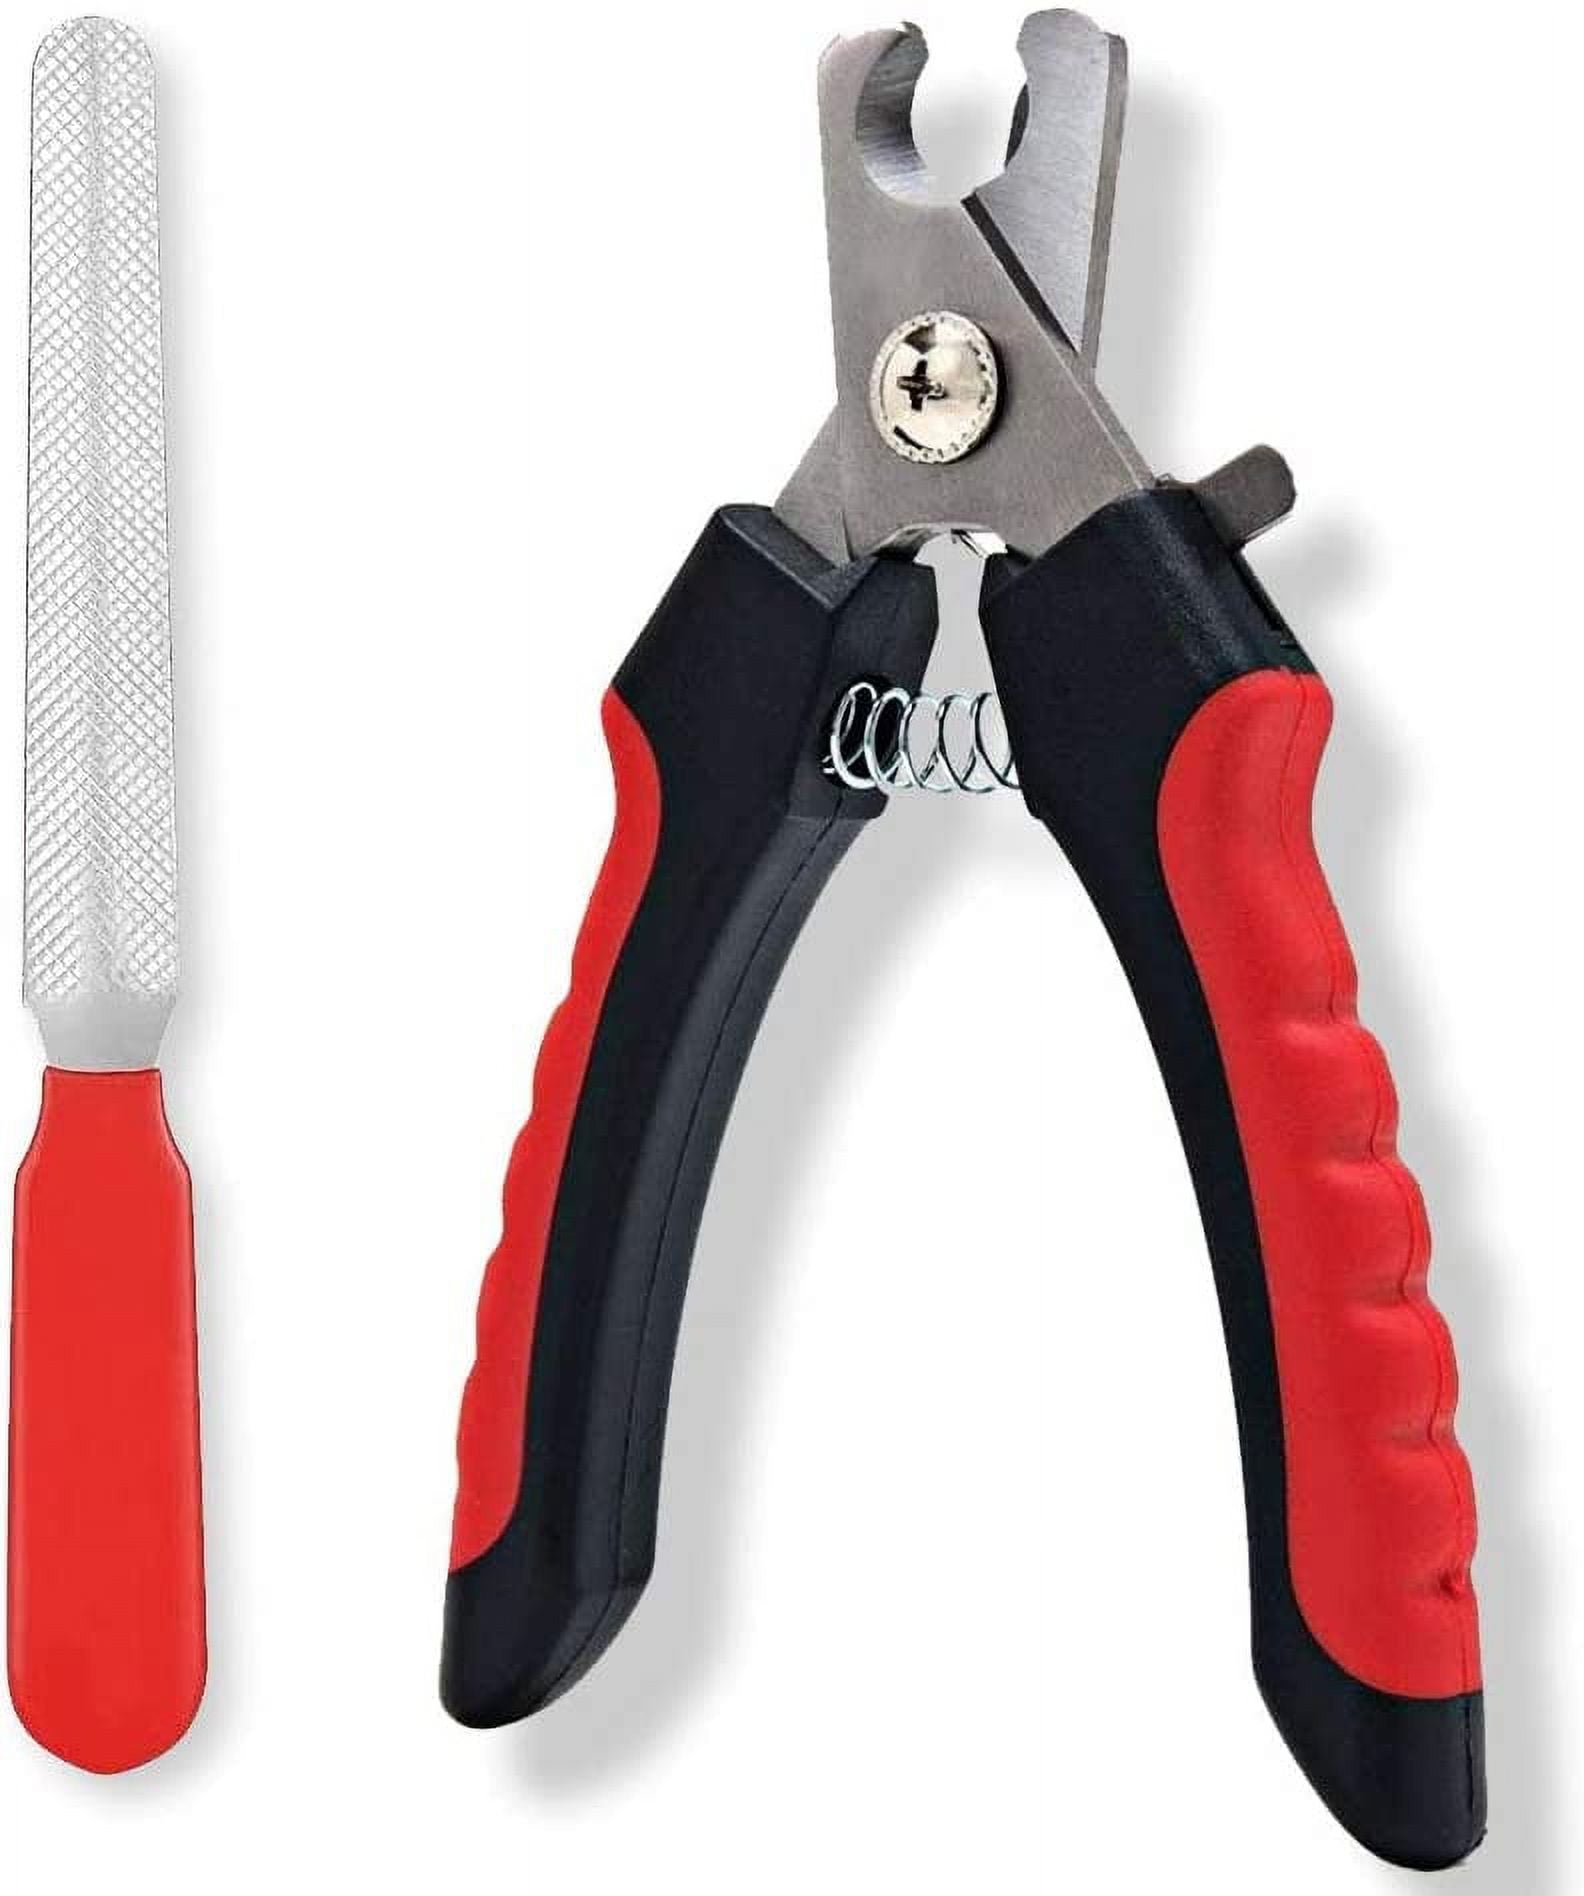 QuickFinder Medium Dog Nail Clipper for Dogs up to 75 lbs. - Walmart.com